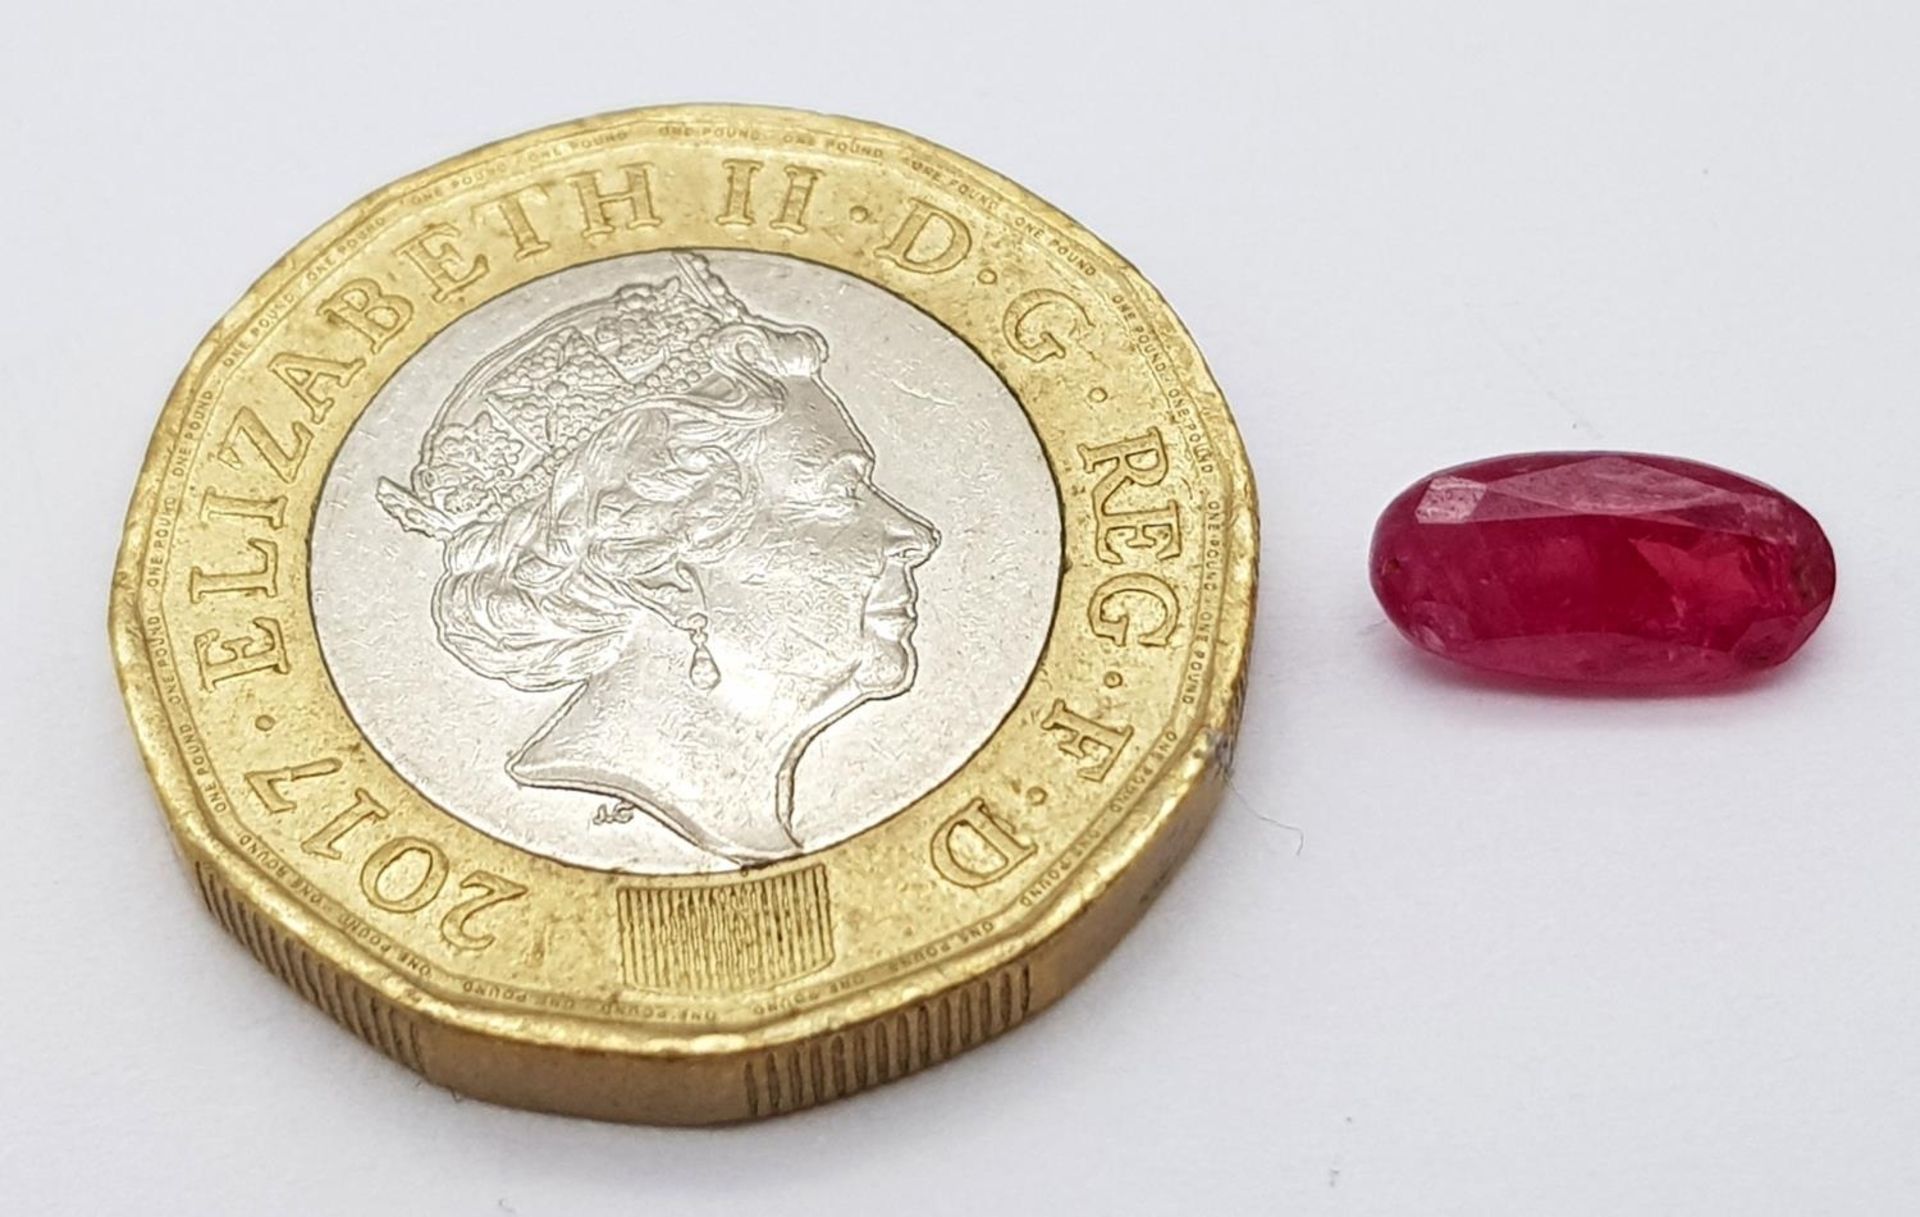 A 1.47ct Untreated Mozambique Ruby Gemstone - GFCO Swiss Certified. - Image 5 of 5